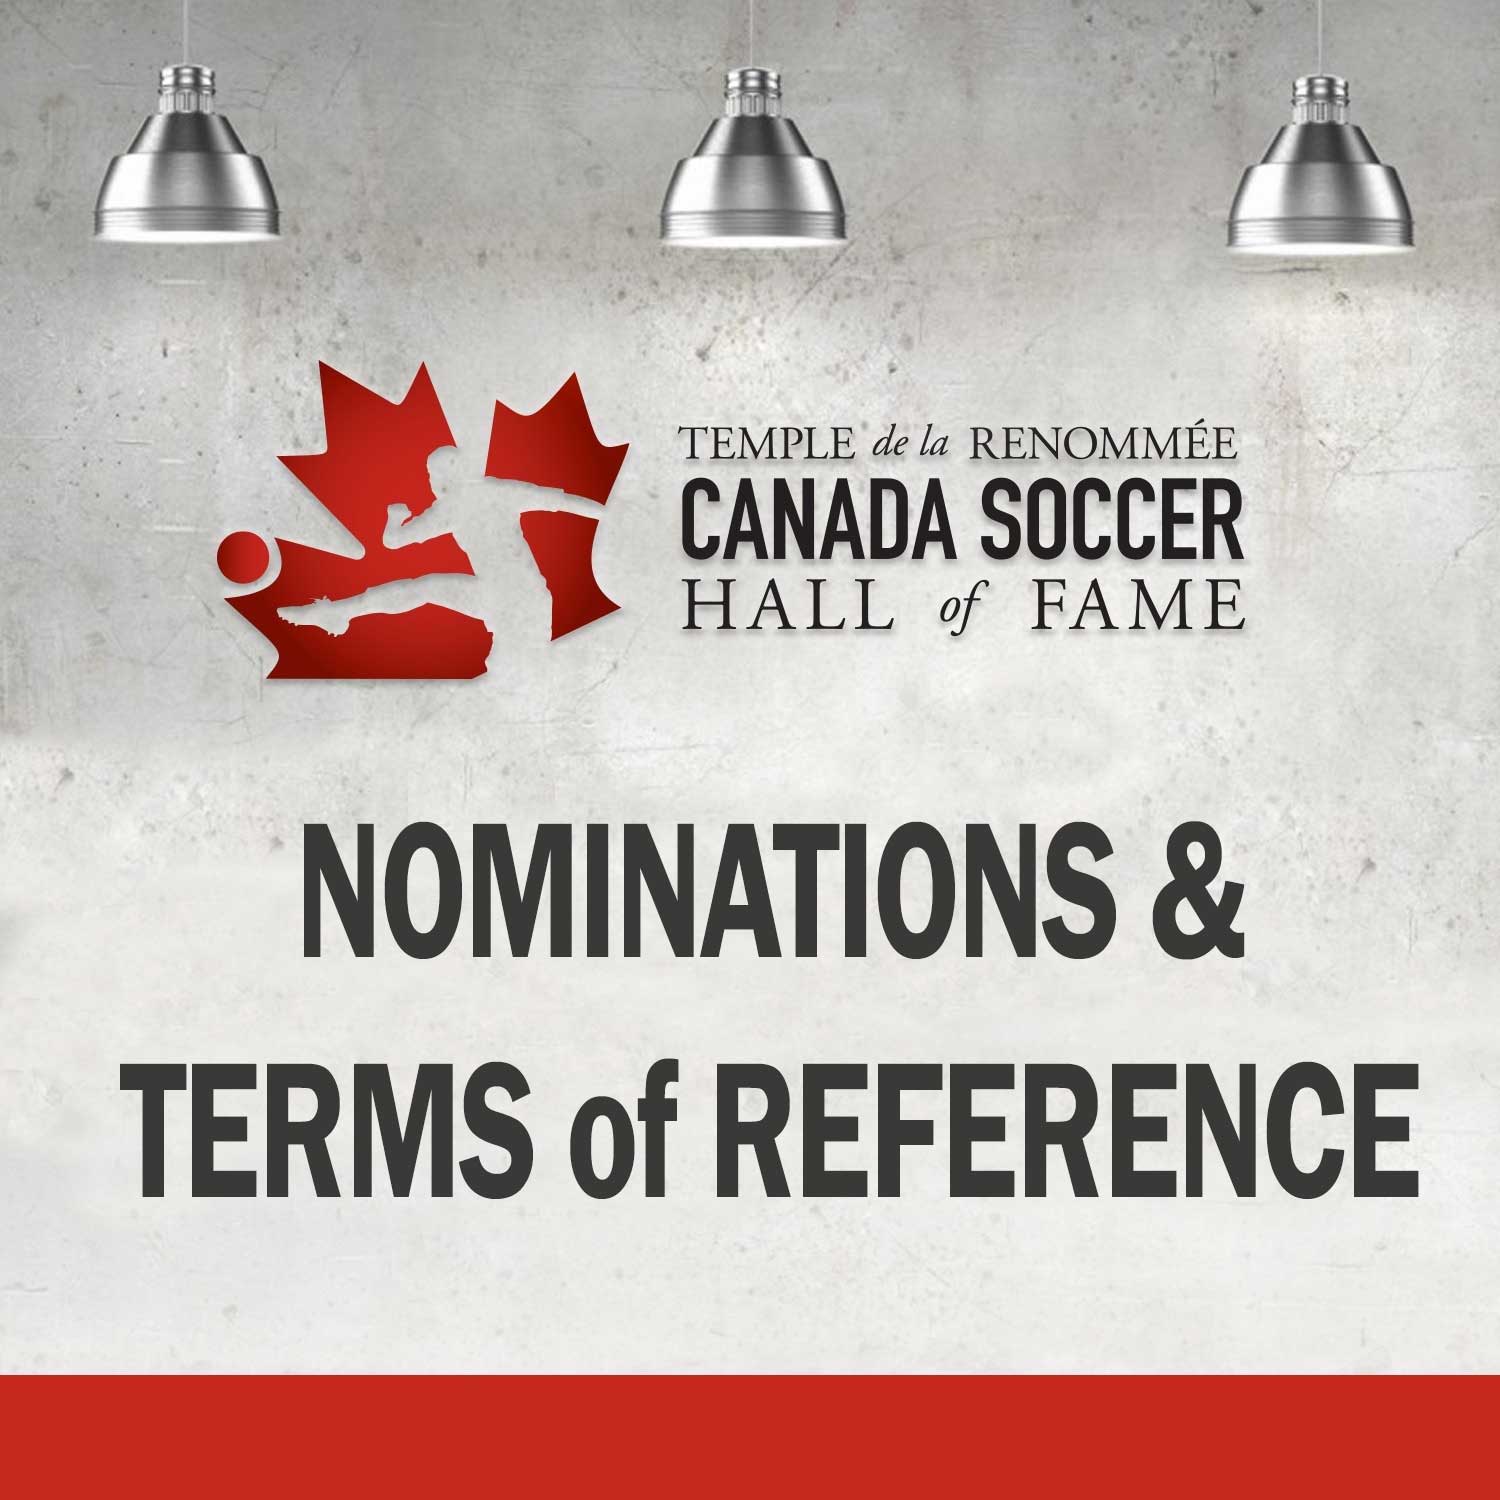 Nominations & Terms of Reference